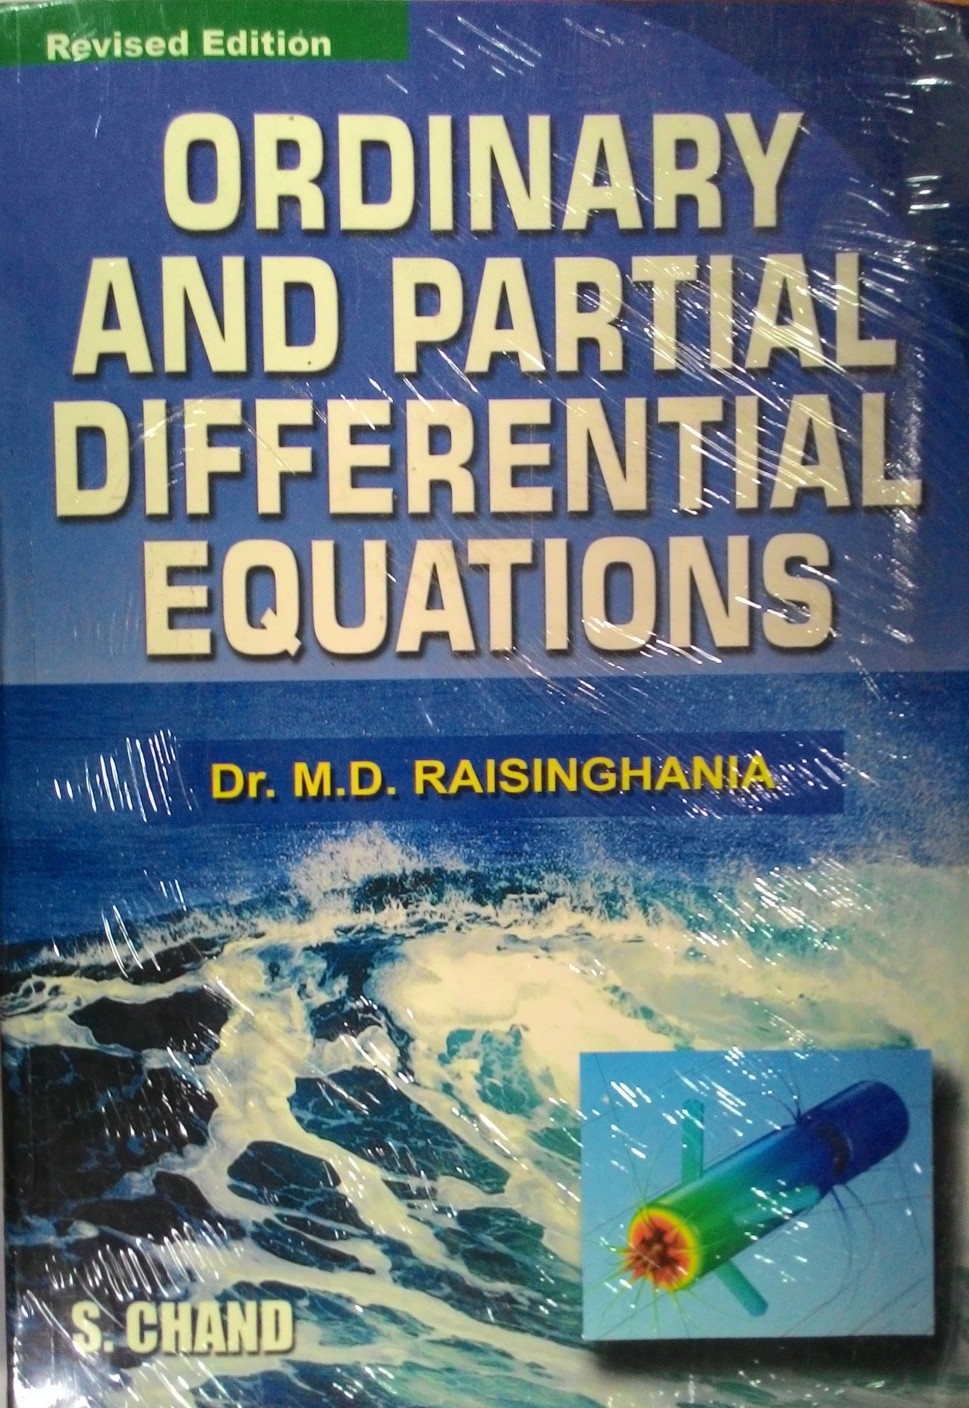 ordinary and partial differential equations by raisinghania pdf